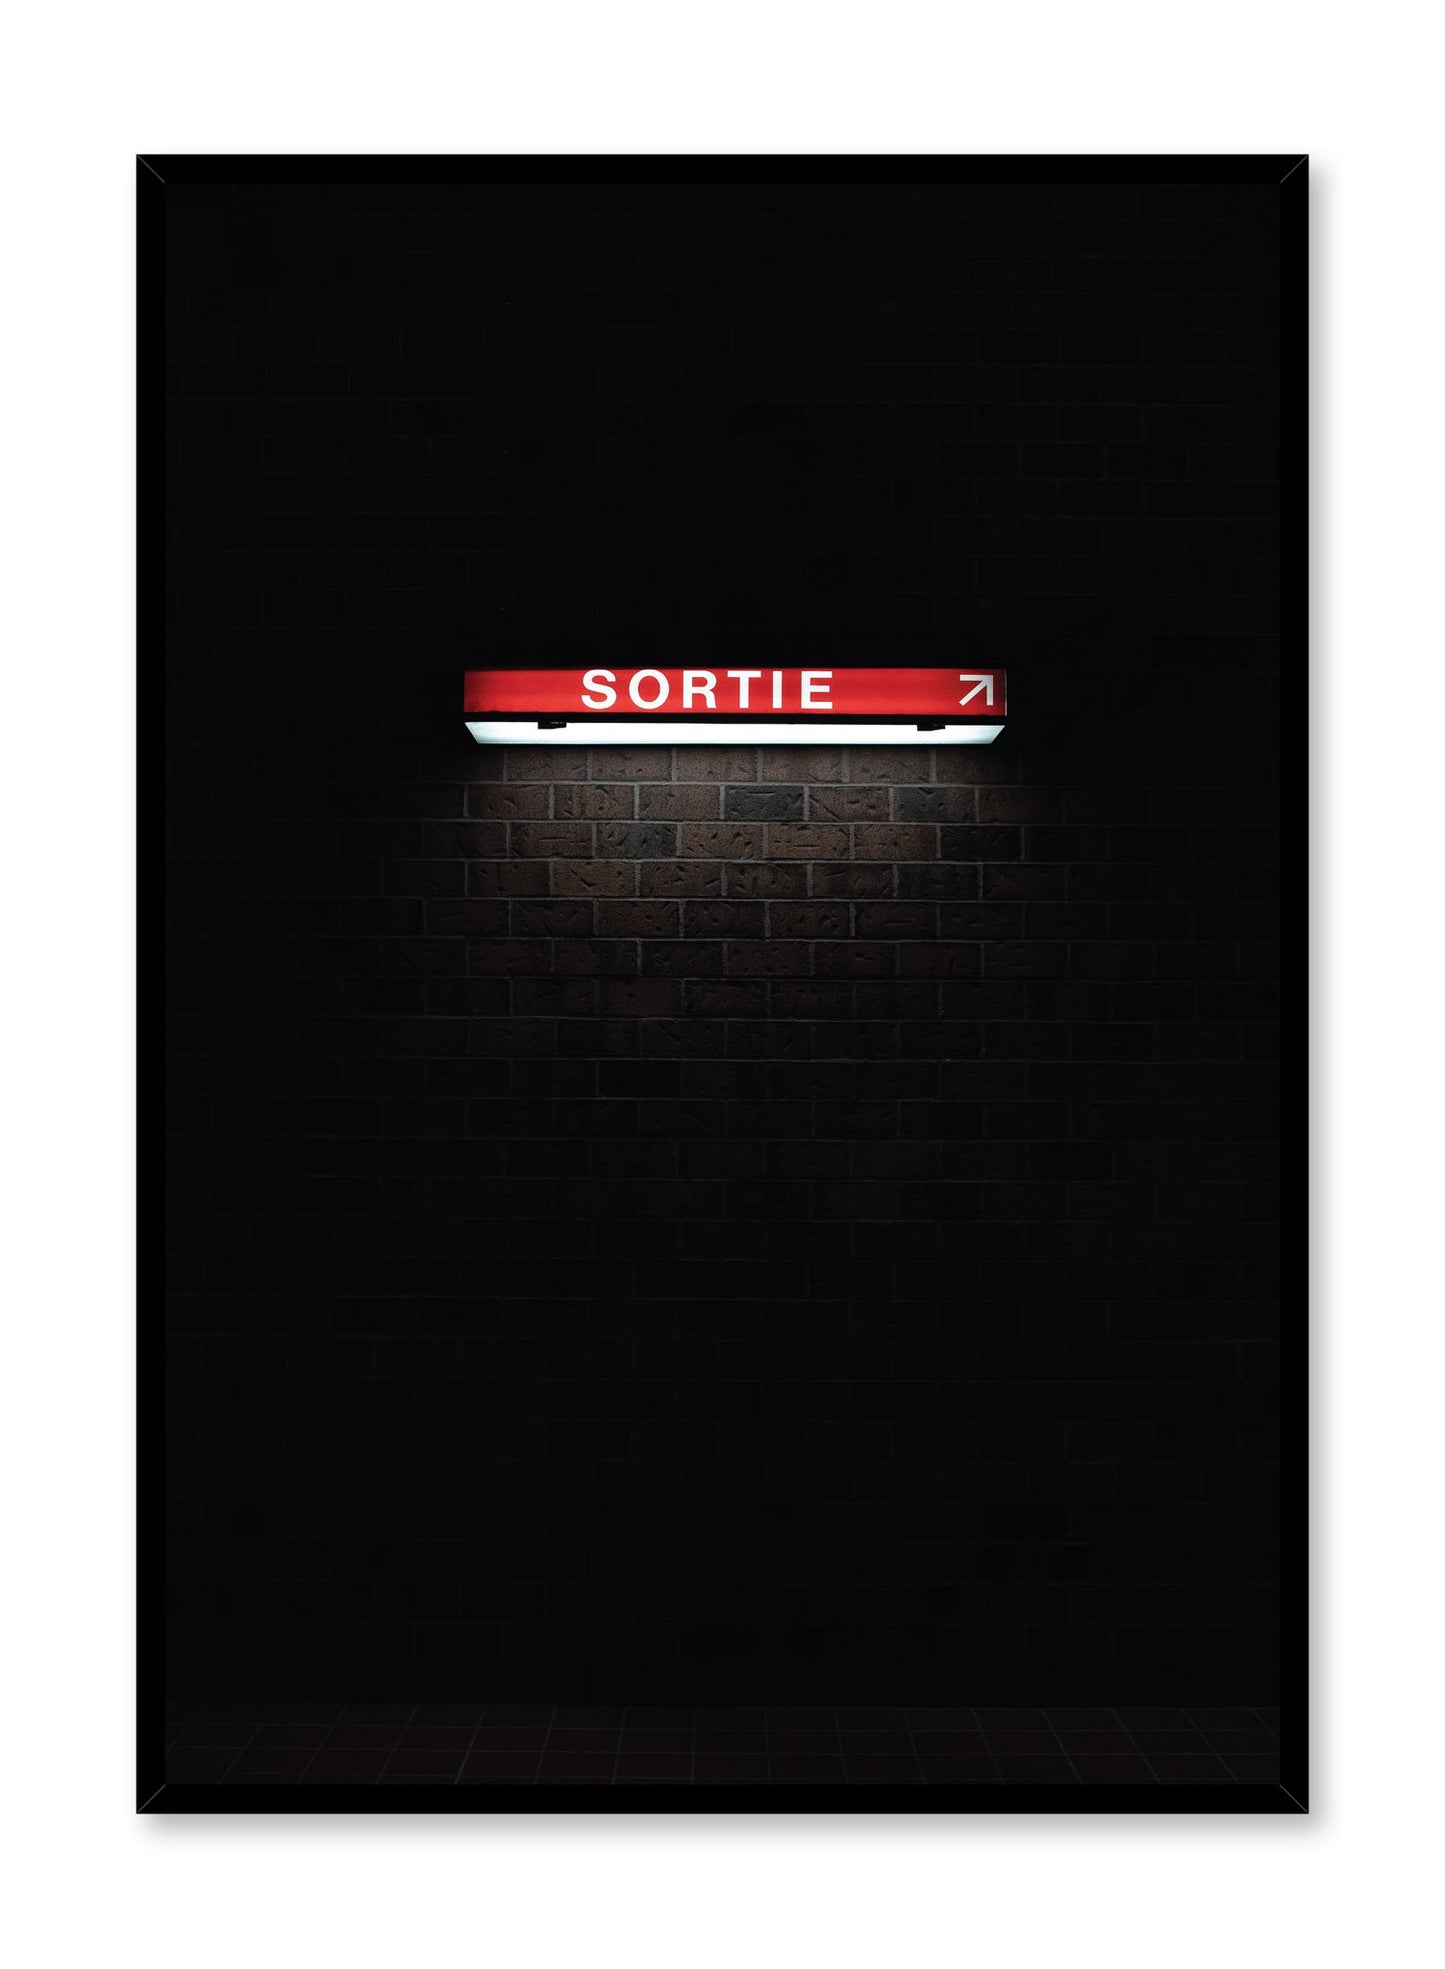 Minimalist design poster by Opposite Wall with urban street photography of Montreal metro sortie exit sign